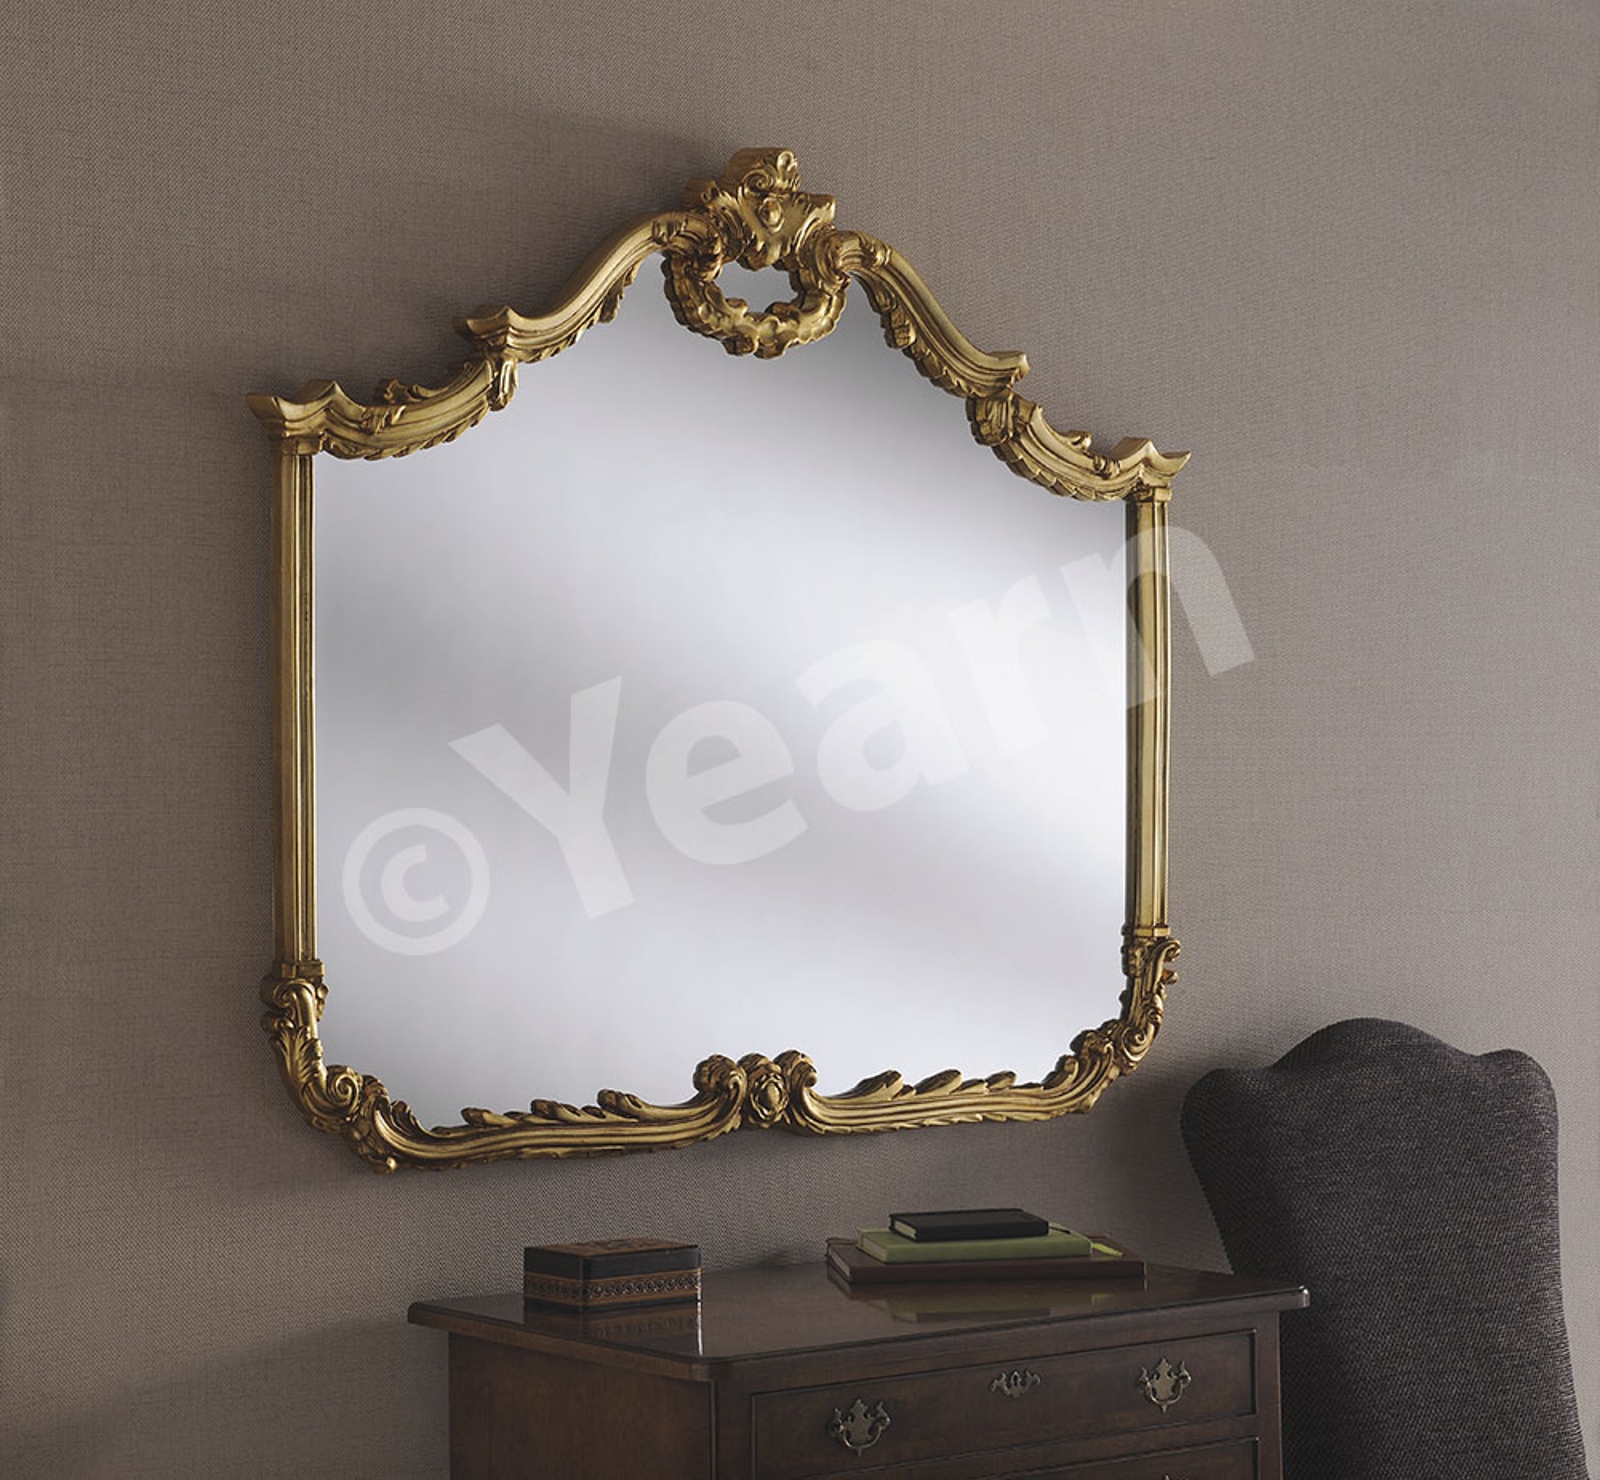 Shaped Crested Large Gold Ornate Guilt Wall Mirror 299 00 Mirror Shop Uk